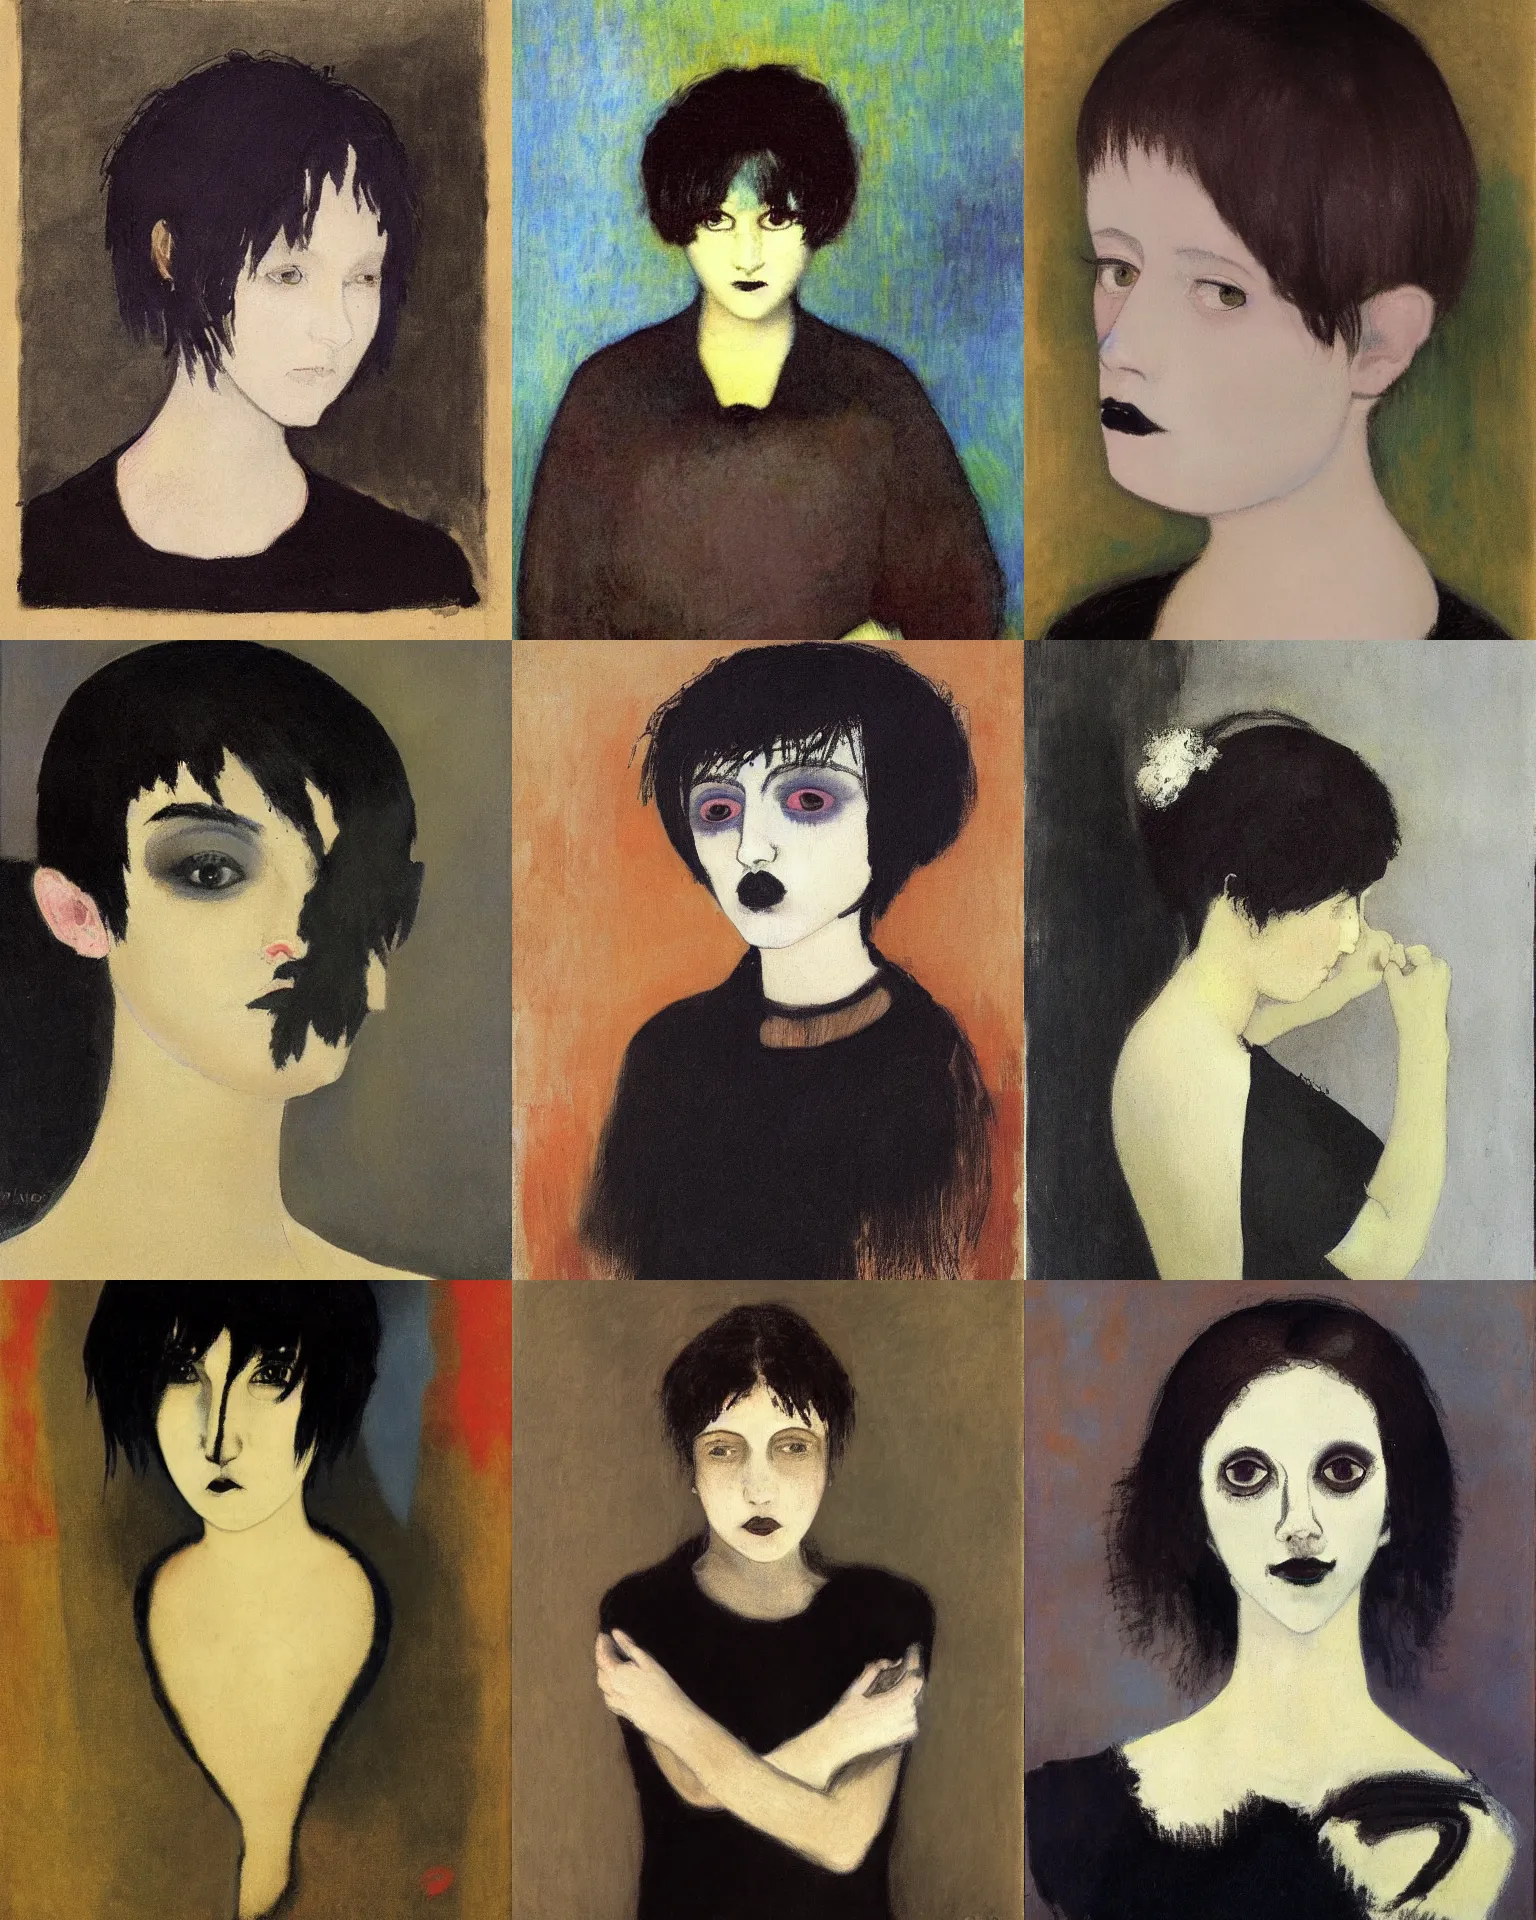 Prompt: A goth portrait painted by Odilon Redon. Her hair is naturally dark brown and cut into a short, messy pixie cut. She has a slightly rounded face, with a pointed chin, large entirely-black eyes, and a small nose. She is wearing a black tank top, a black leather jacket, a black knee-length skirt, a black choker, and black leather boots.